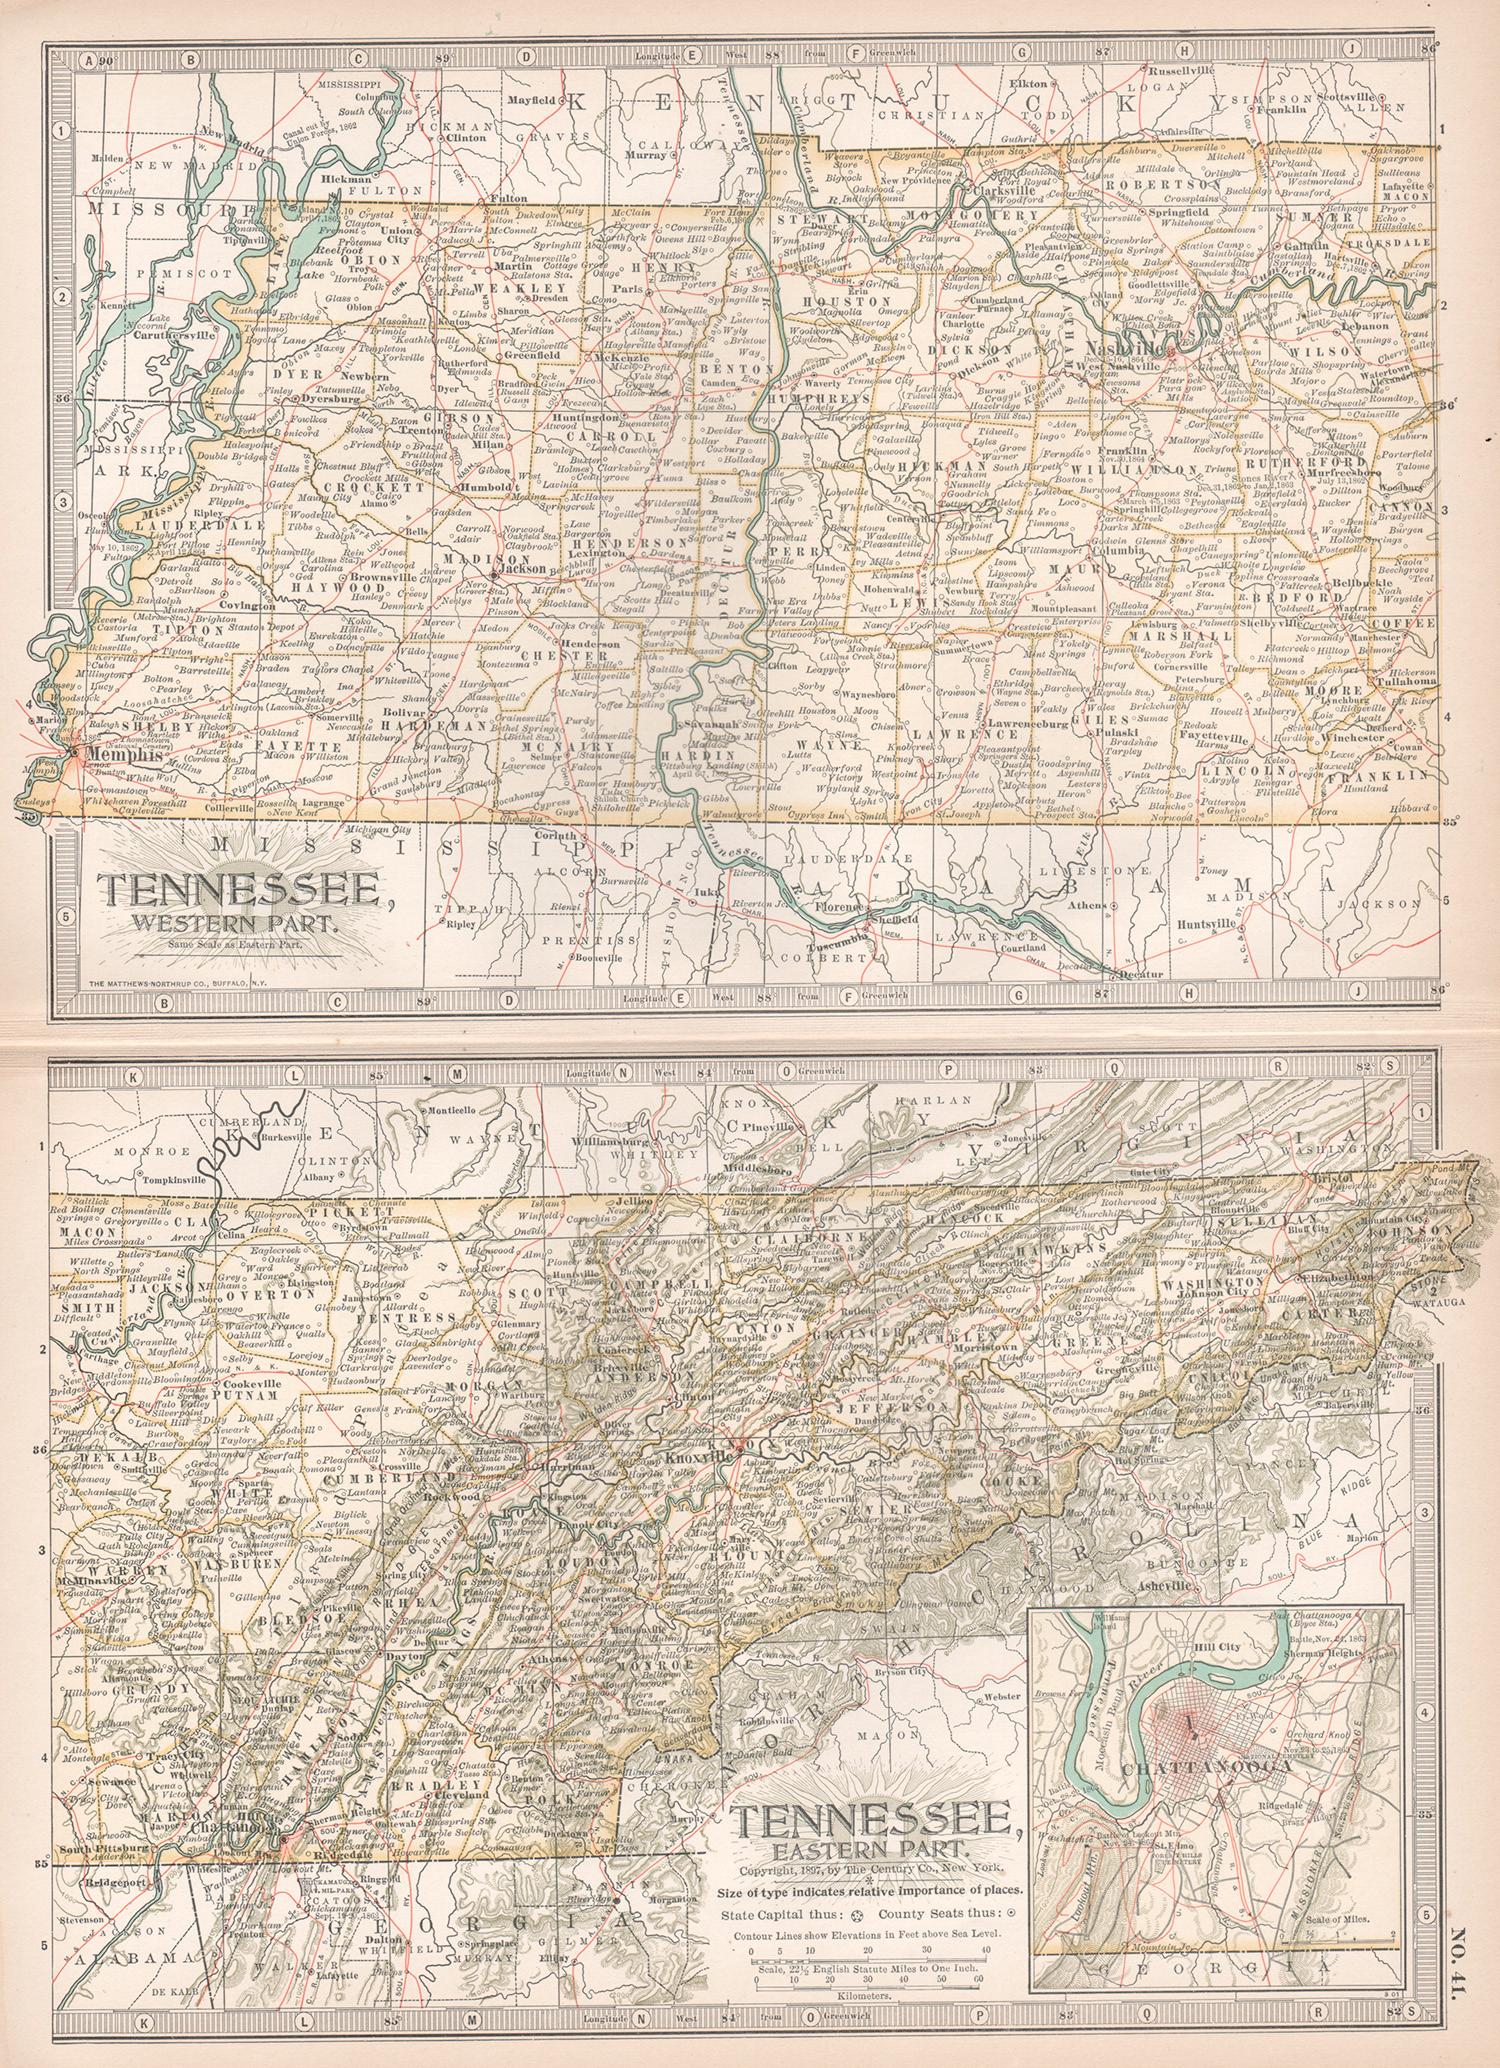 Unknown Print - Tennessee. USA Century Atlas state antique vintage map